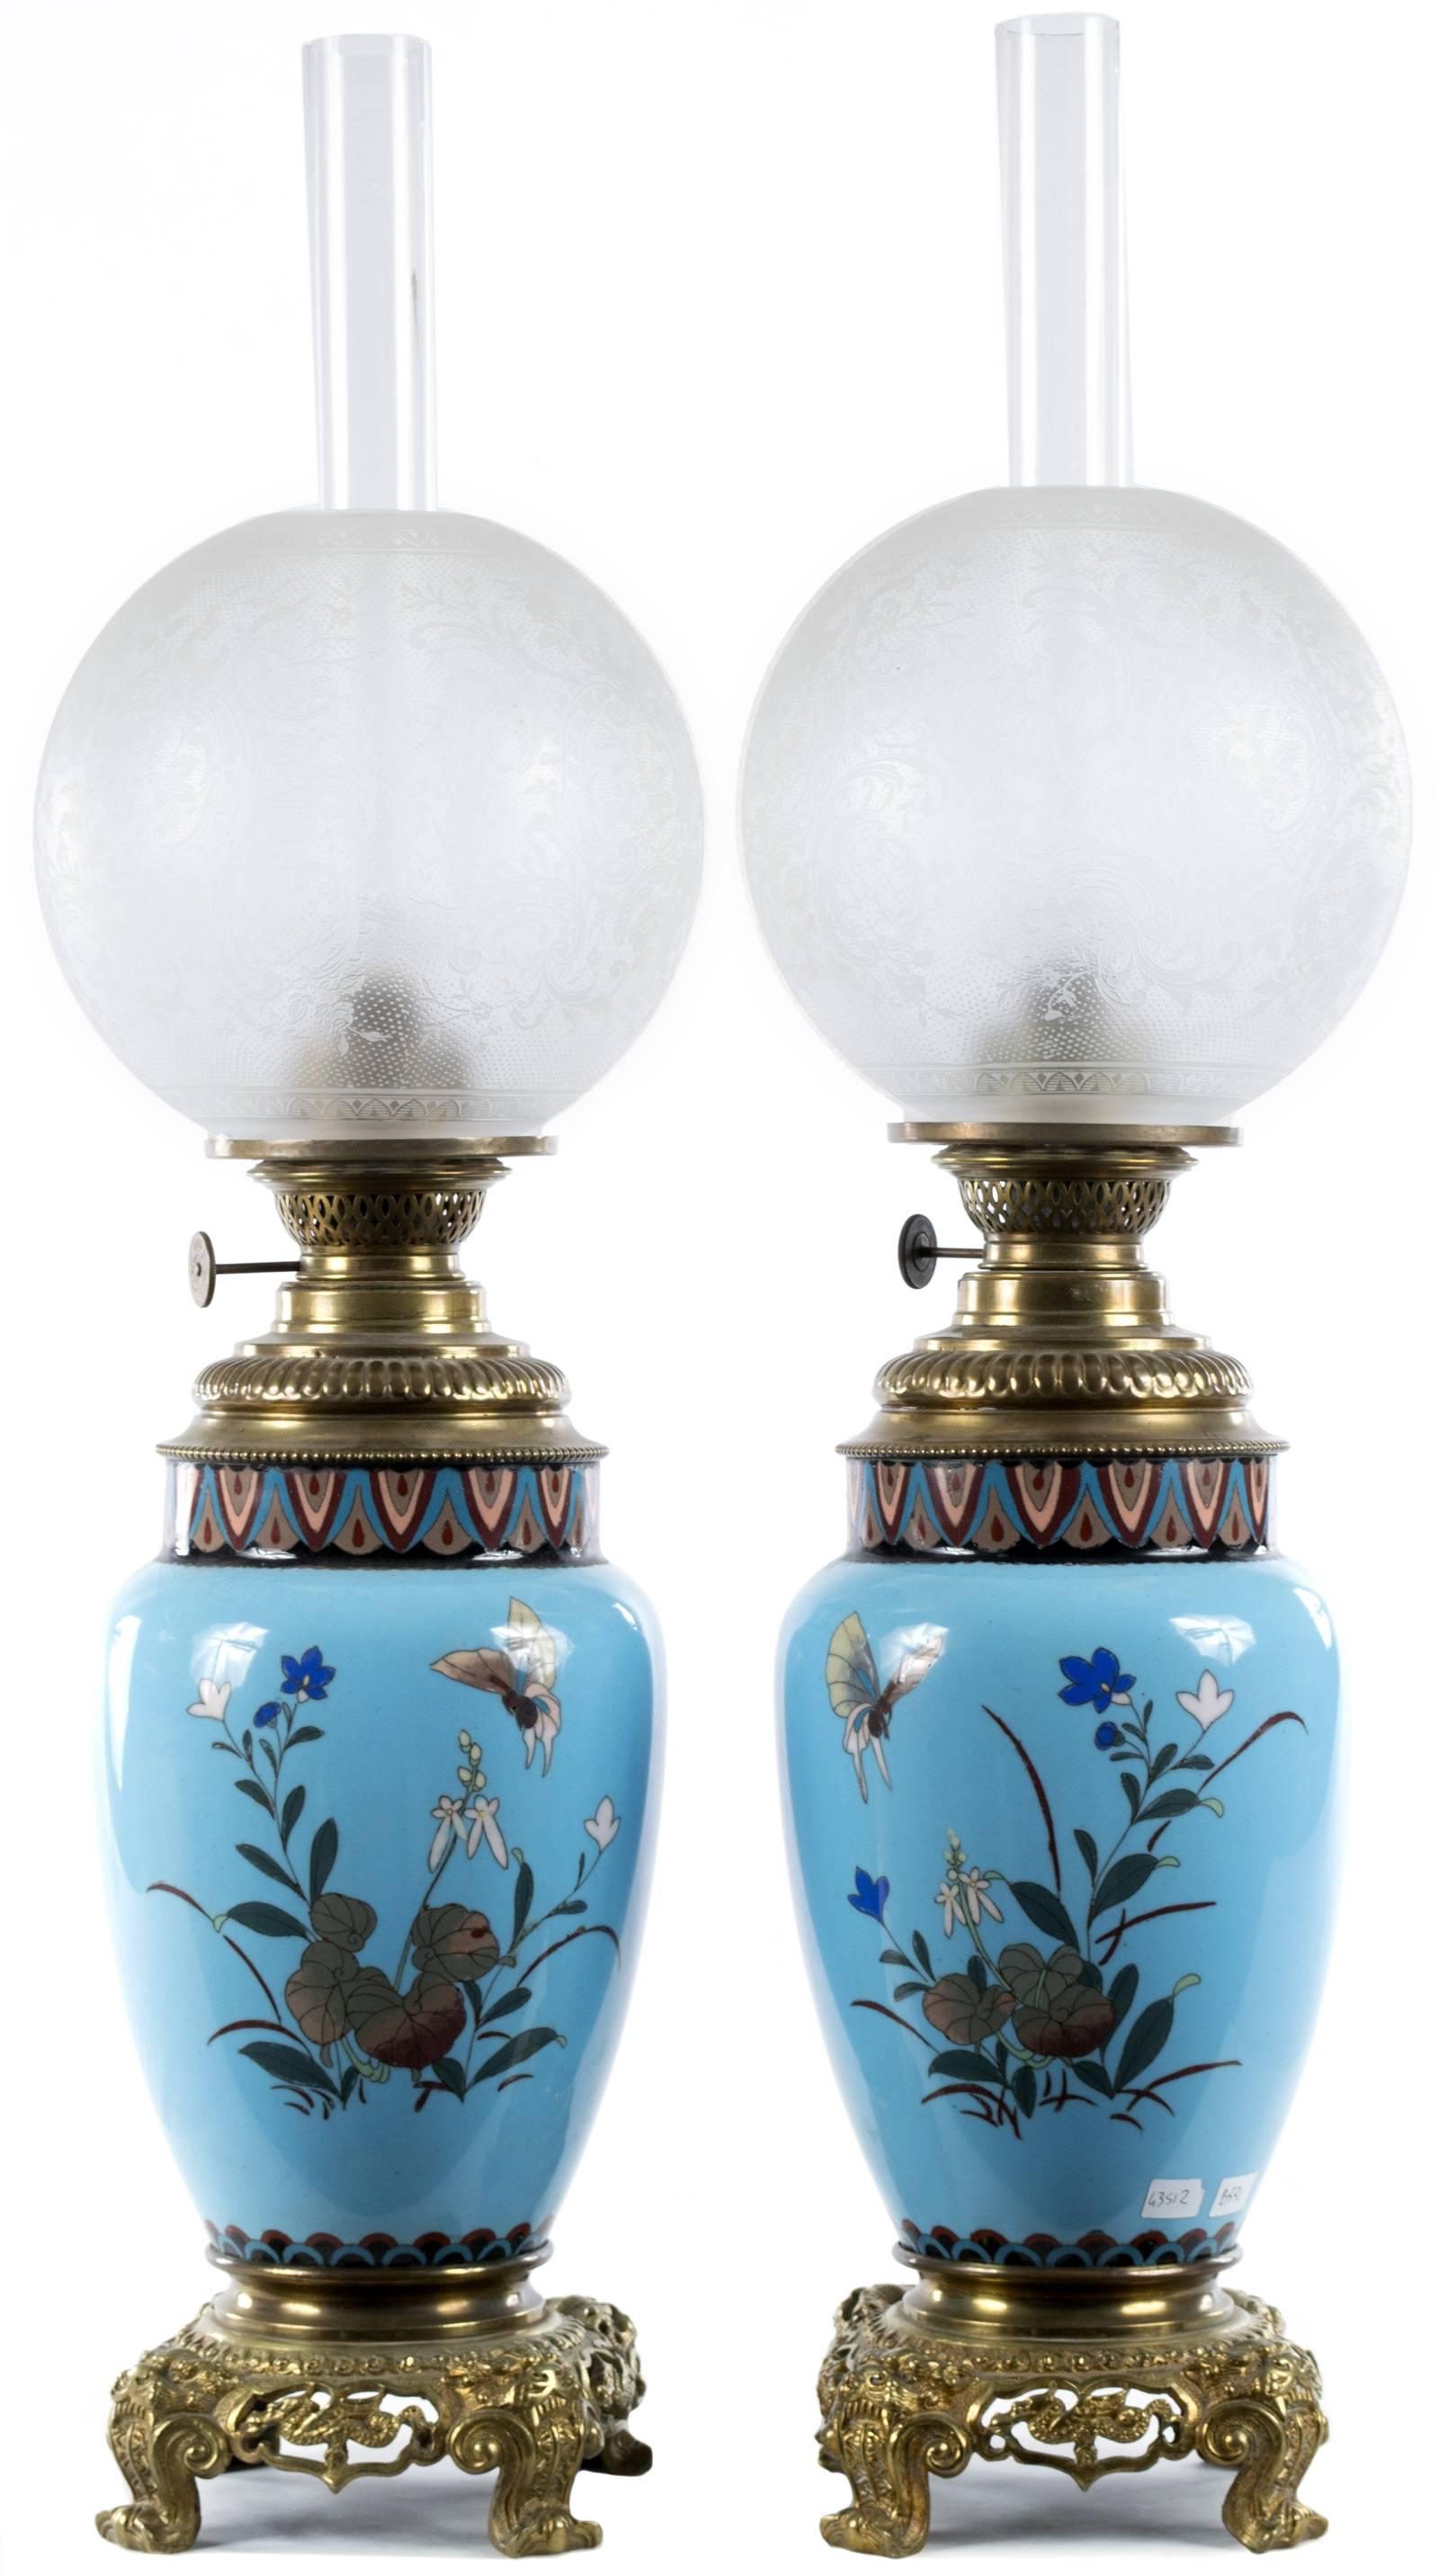 Two beautiful Japanese vases, dating to the third quarter of the nineteenth century and featuring birds flying through cherry blossoms. The lamps were fitted with gilt bronze (i.e. ormolu) mounts and etched glass oil lamps before the turn of the